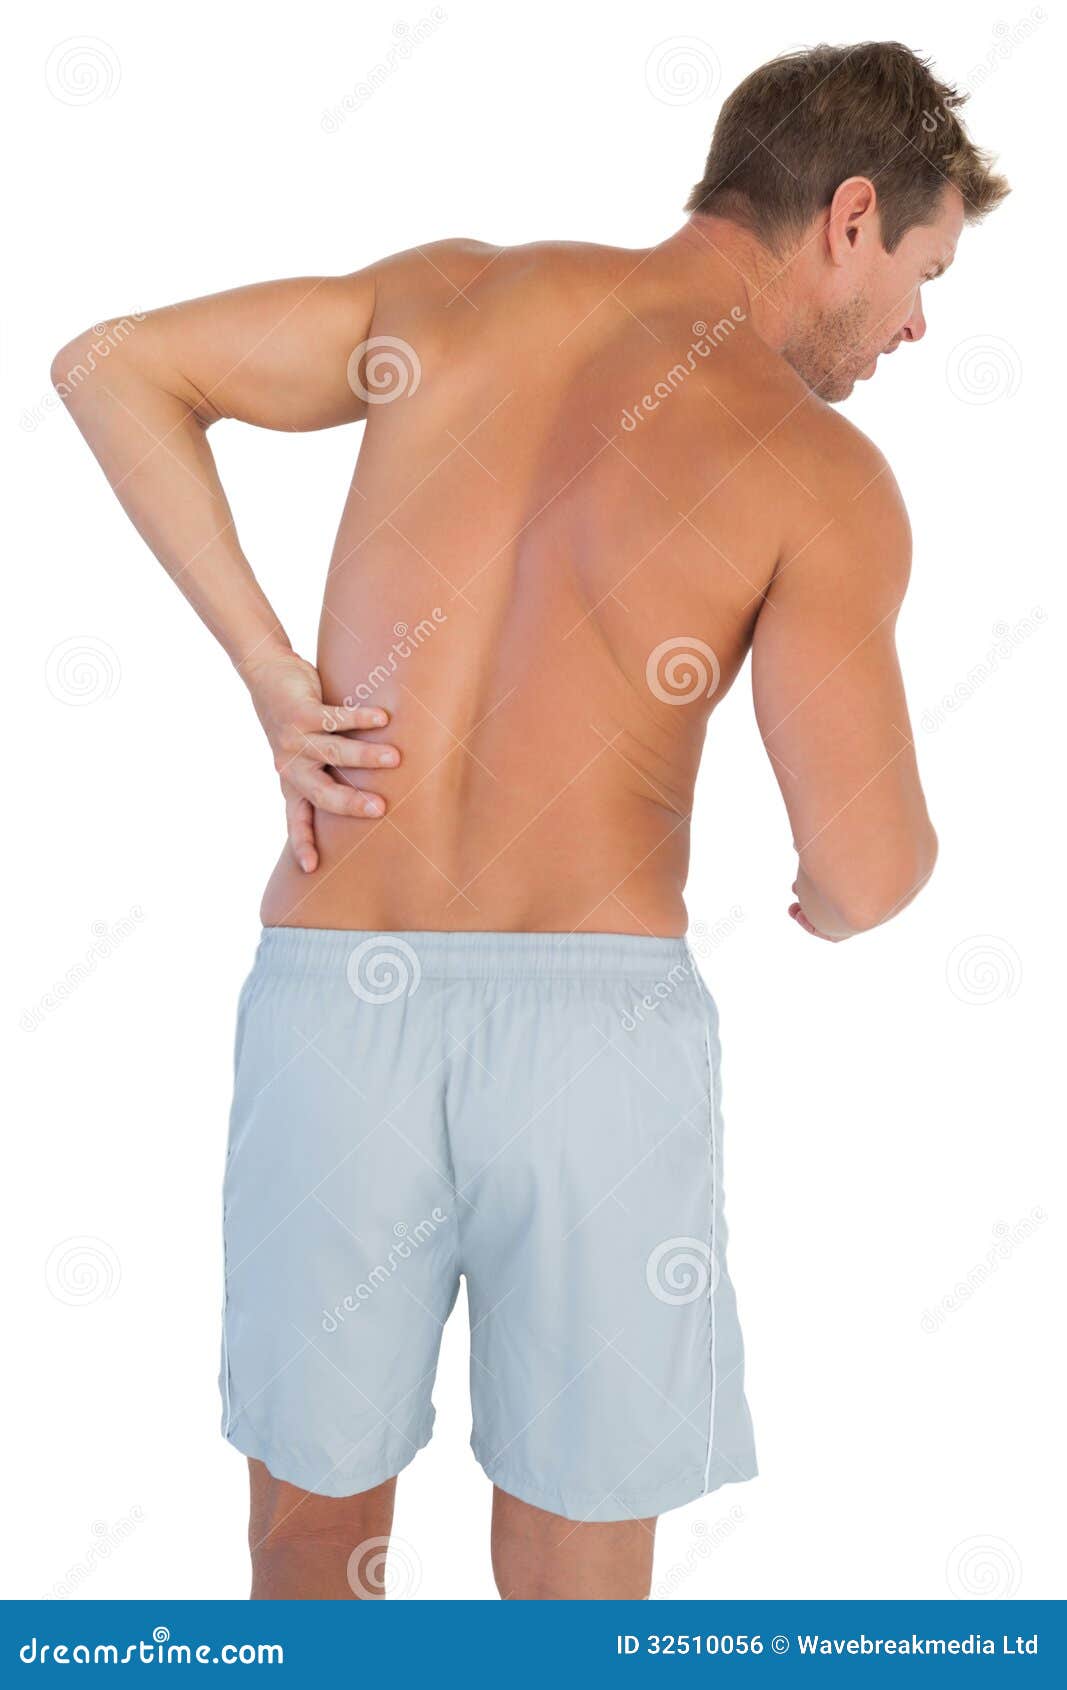 https://thumbs.dreamstime.com/z/man-shorts-suffering-lower-back-pain-white-background-32510056.jpg